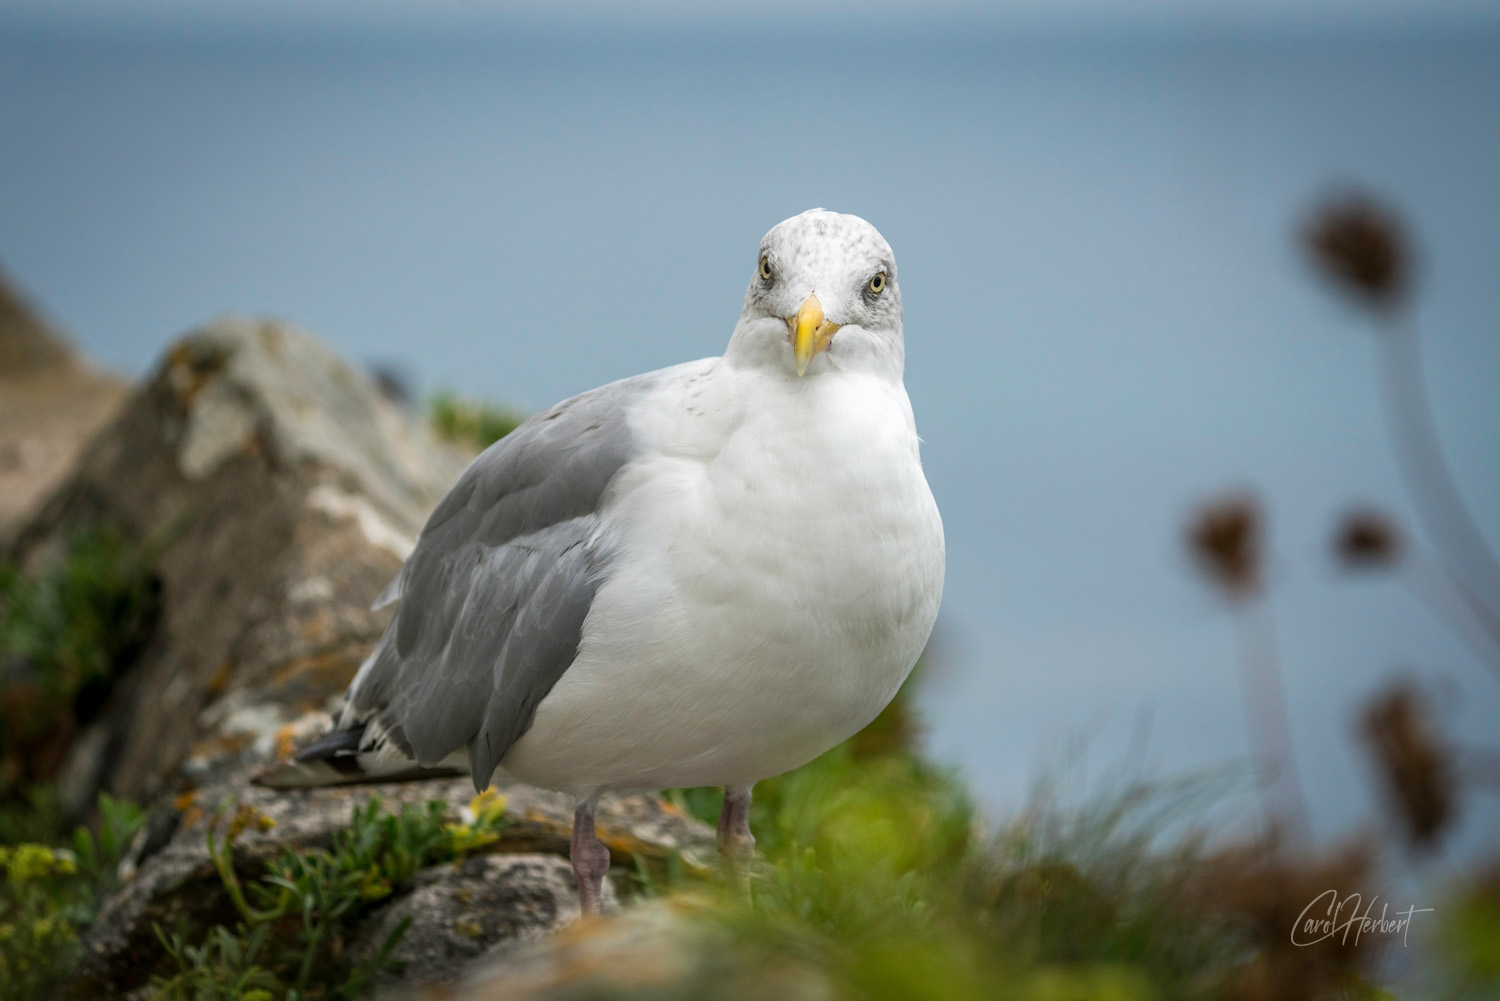 A seagull on a rock looking into the camera